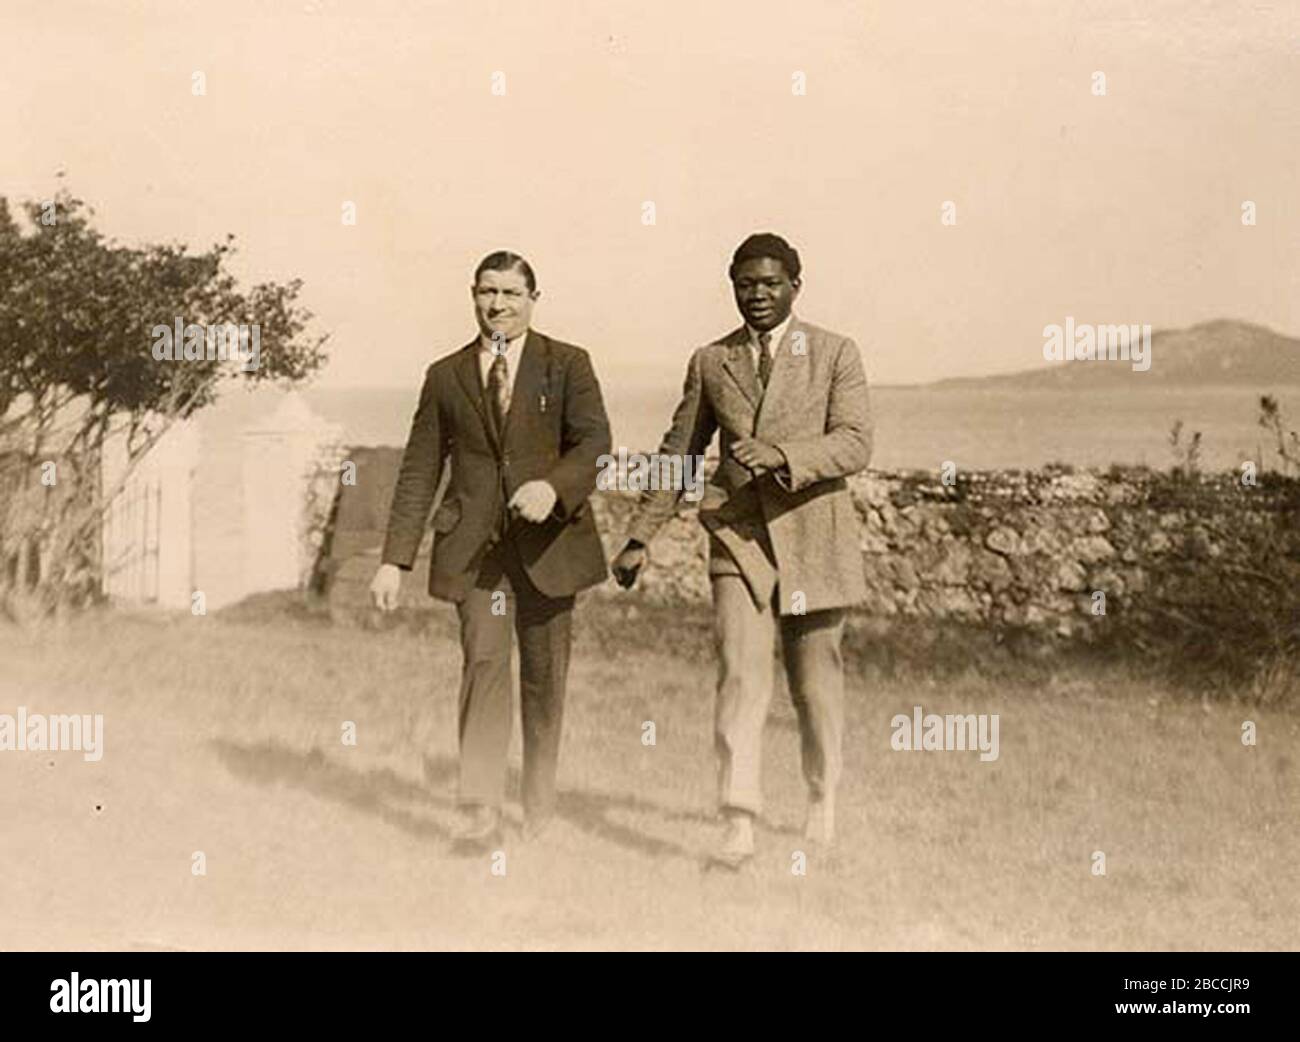 'This is Battling Siki from Senegal, World Light Heavyweight Boxing Champion, with his sparring partner, Frenchman Eugene Stuber. Siki was in Dublin to fight Bold Mike McTigue (aka Methuselah) who hailed from Kilnamona, Co. Clare. The two men are pictured outside the Claremont Hotel, Howth, Co. Dublin. The fight was on Saturday, 17 March 1923 (St. Patrick's Day) at La Scala Theatre, Dublin. McTigue won on points. Irish Times reporting on Monday 19 March was a little sniffy about the quality of the boxing: There was an almost total absence of those thrills and exciting incidents one is wont to Stock Photo